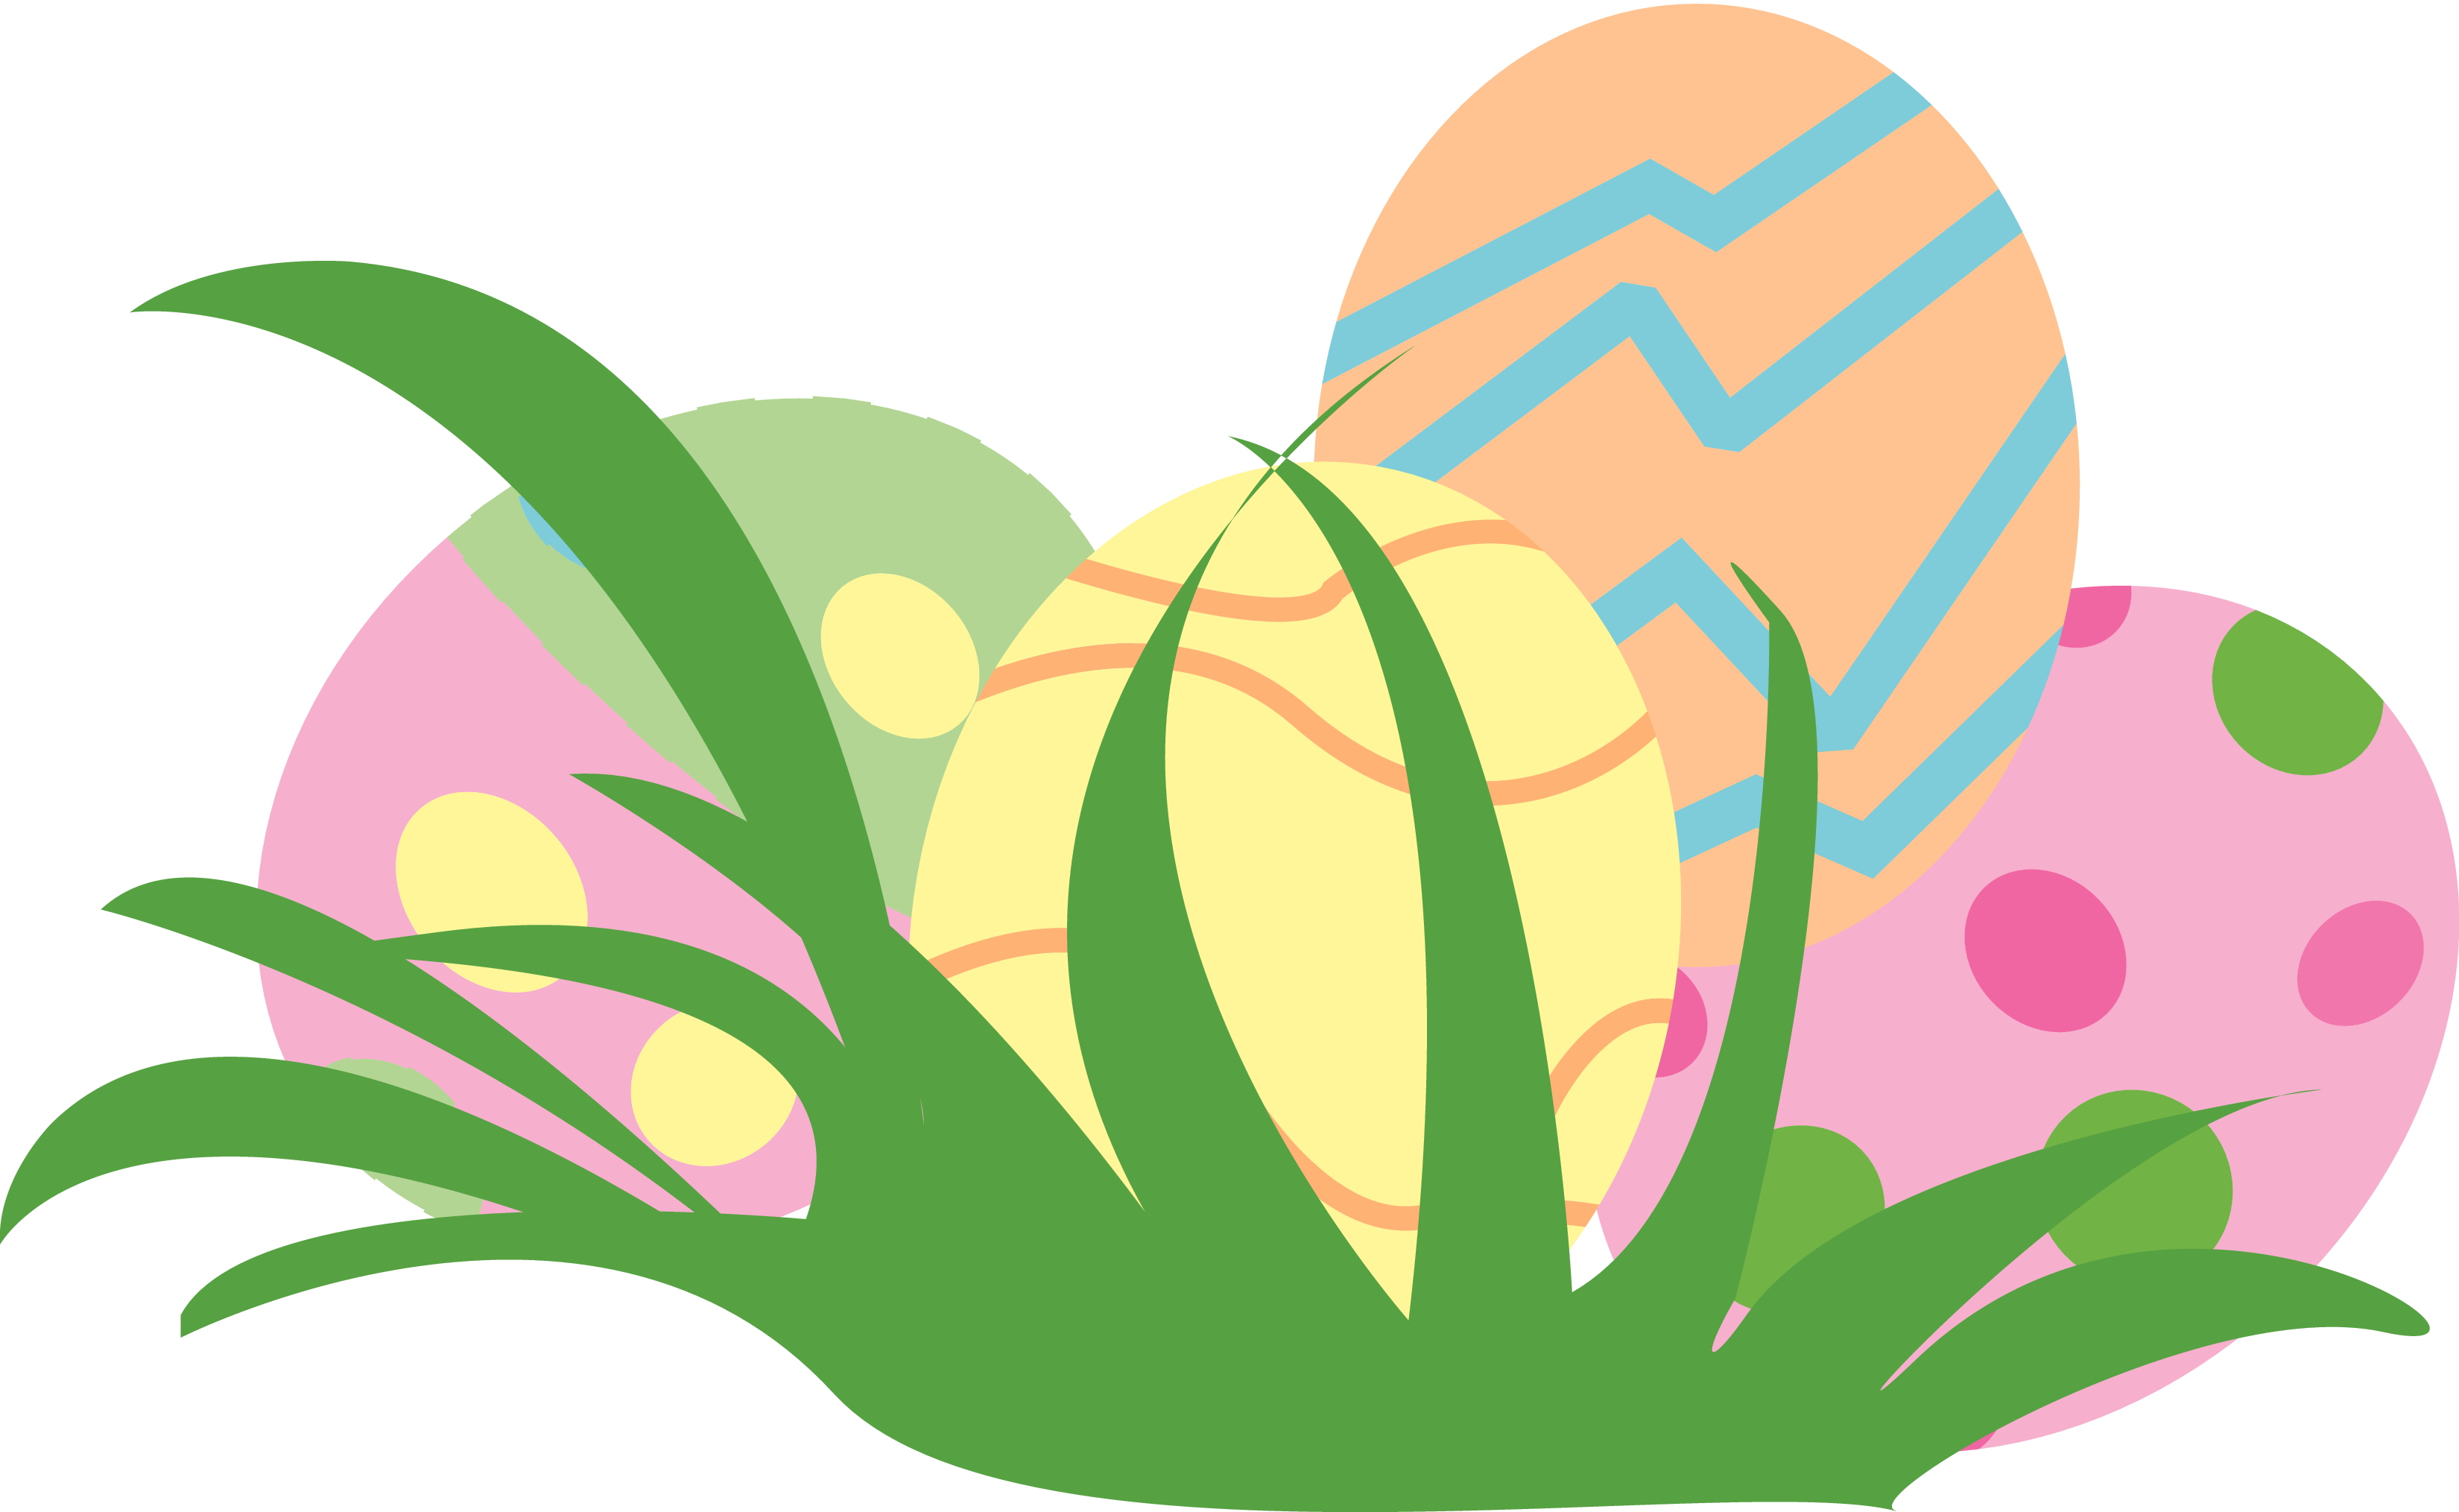 Pastel egg viewing eggs. 2016 clipart easter